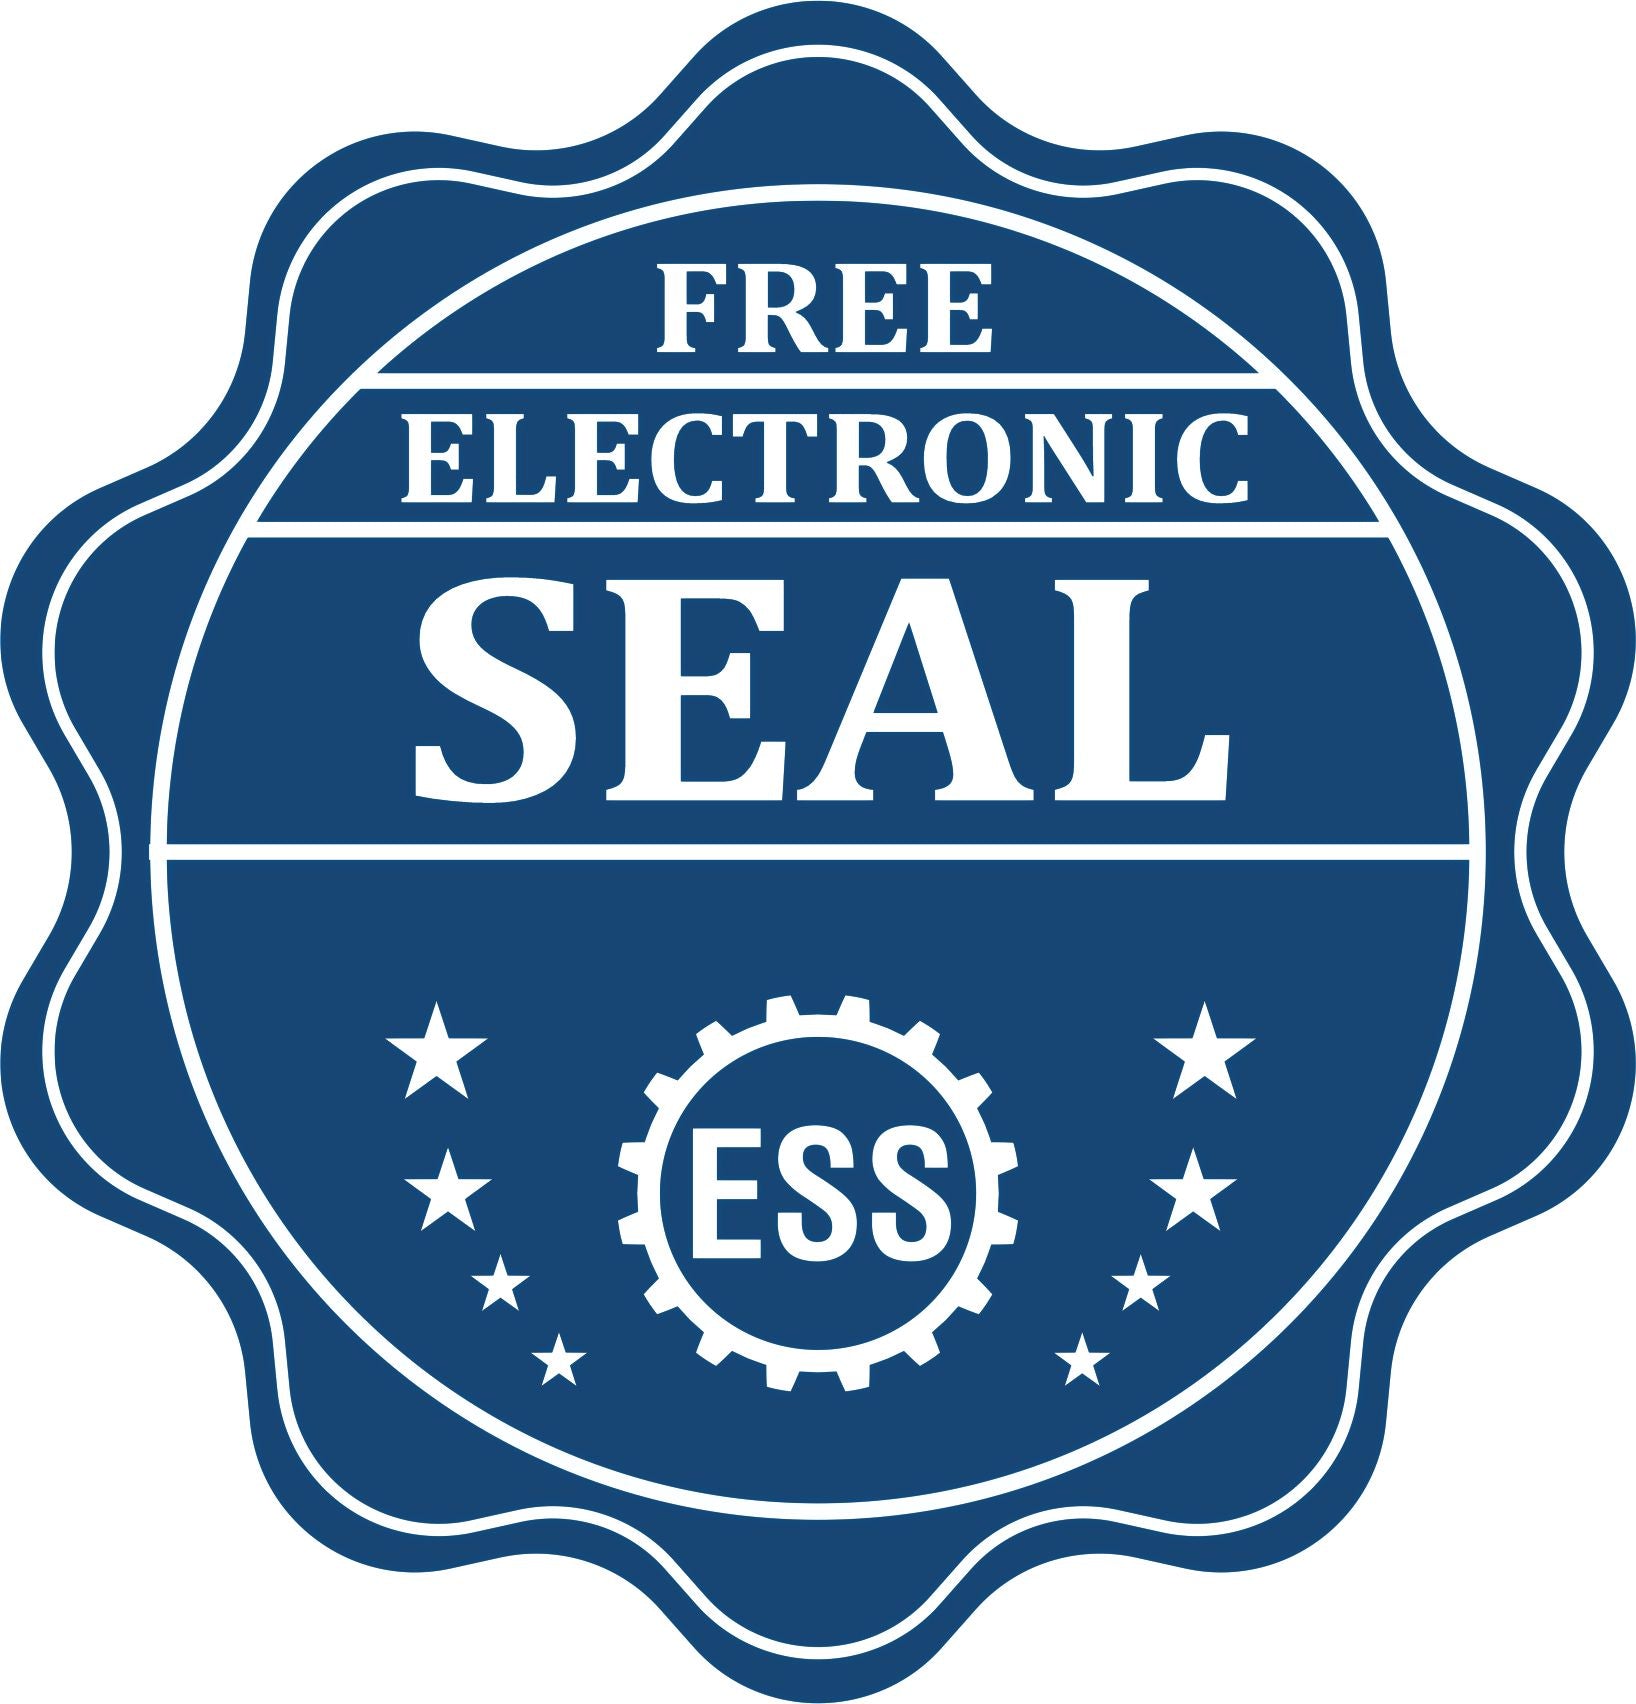 A badge showing a free electronic seal for the Super Slim Wyoming Notary Public Stamp with stars and the ESS gear on the emblem.